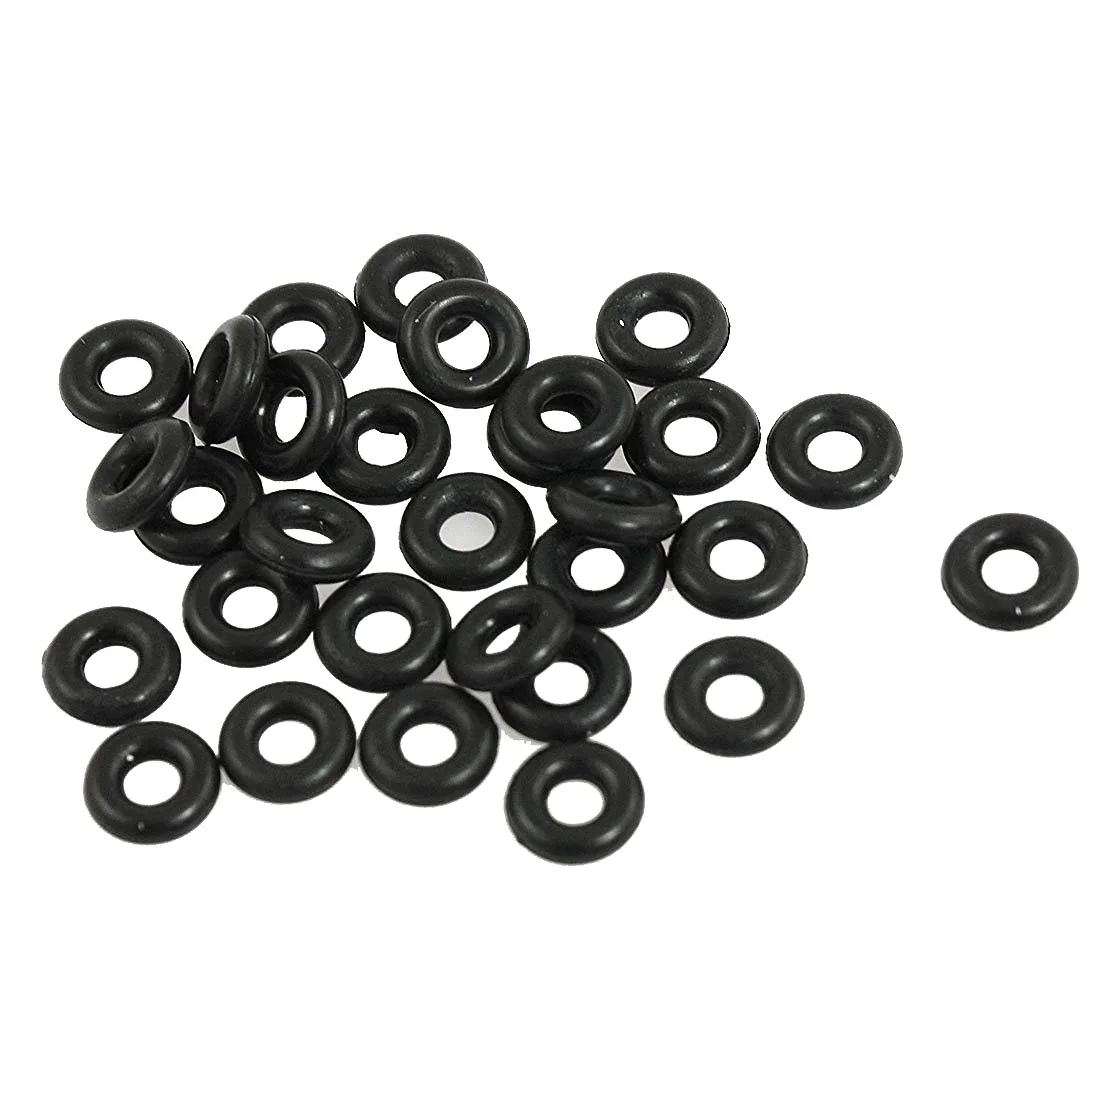 Rubber Ring Fishing | Ring 5mm Rubber Rings | 0 5mm Rubber Rings | Rings  Rubber 2.5mm - 30 - Aliexpress